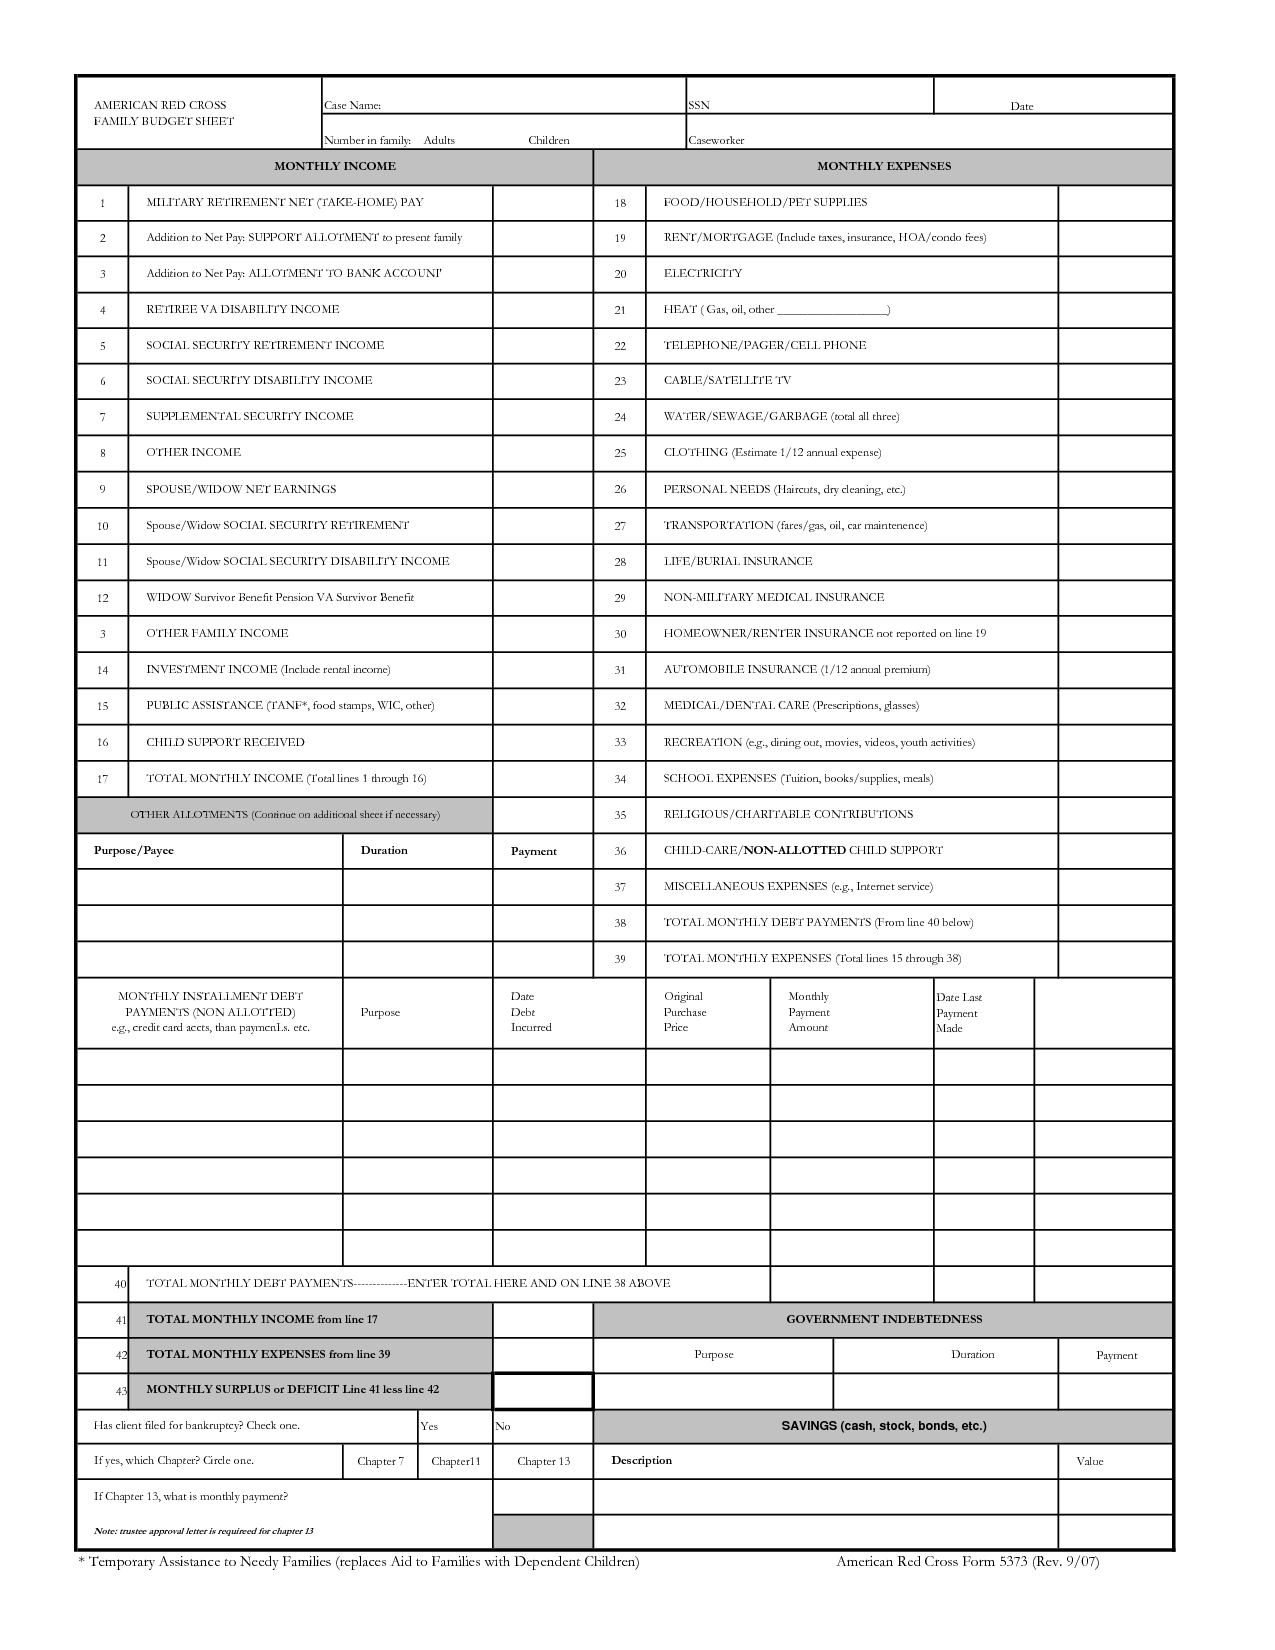 Blank Monthly Income and Expense Sheet Image